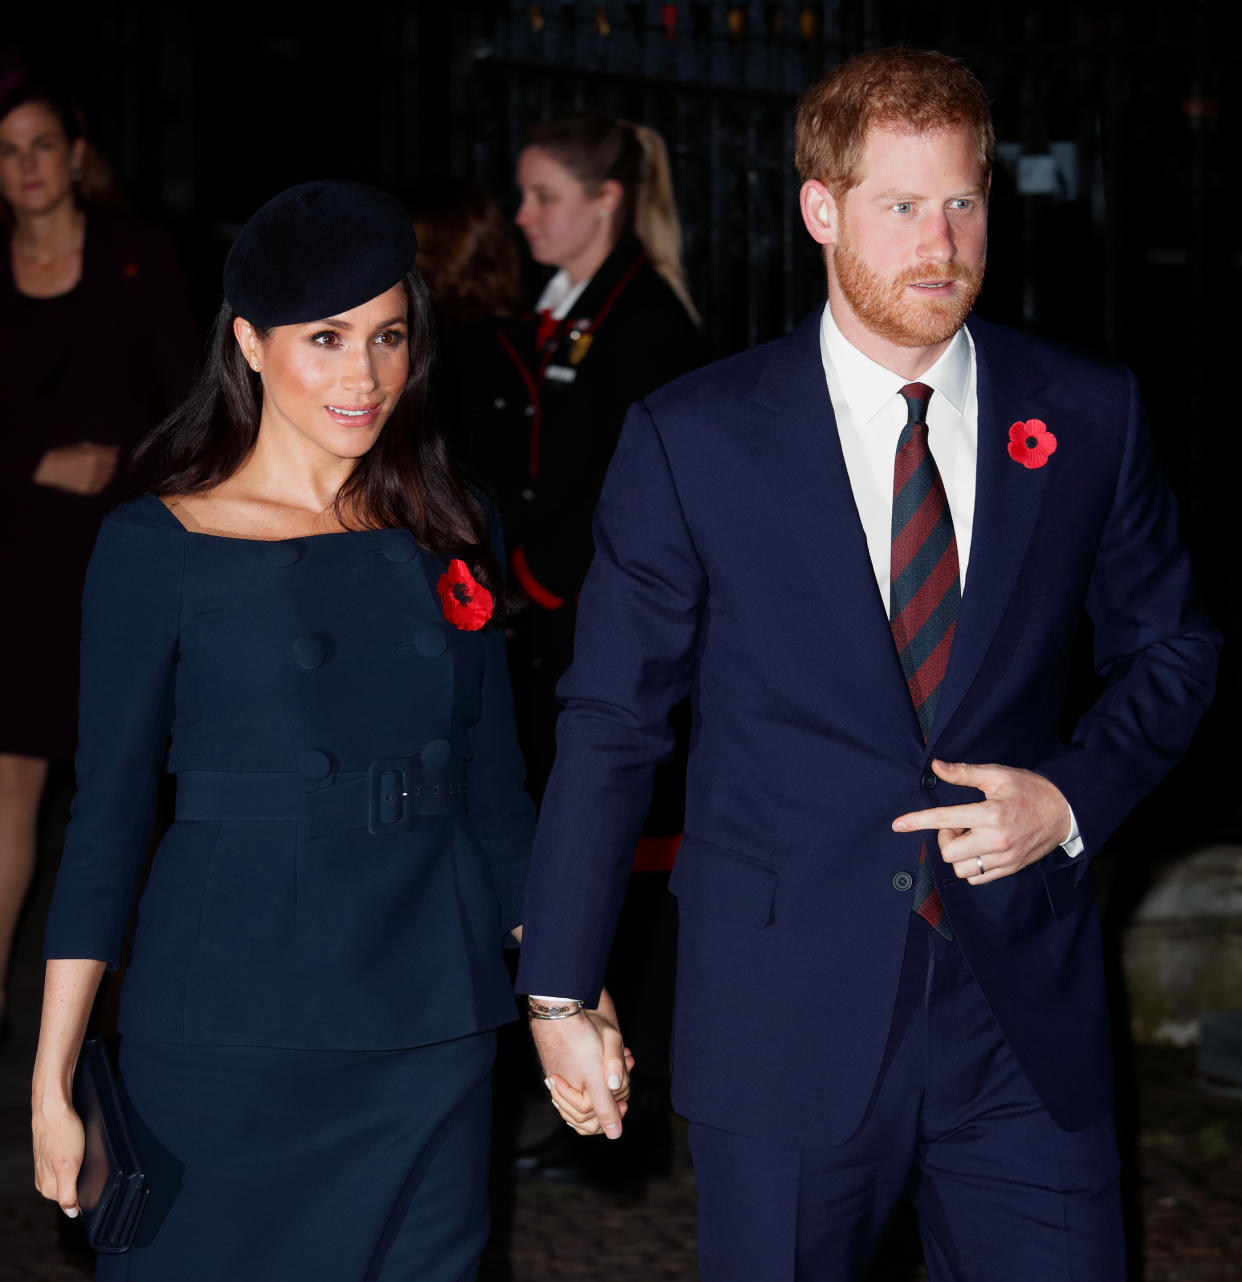 The Duke and Duchess of Sussex. Image via Getty Images.